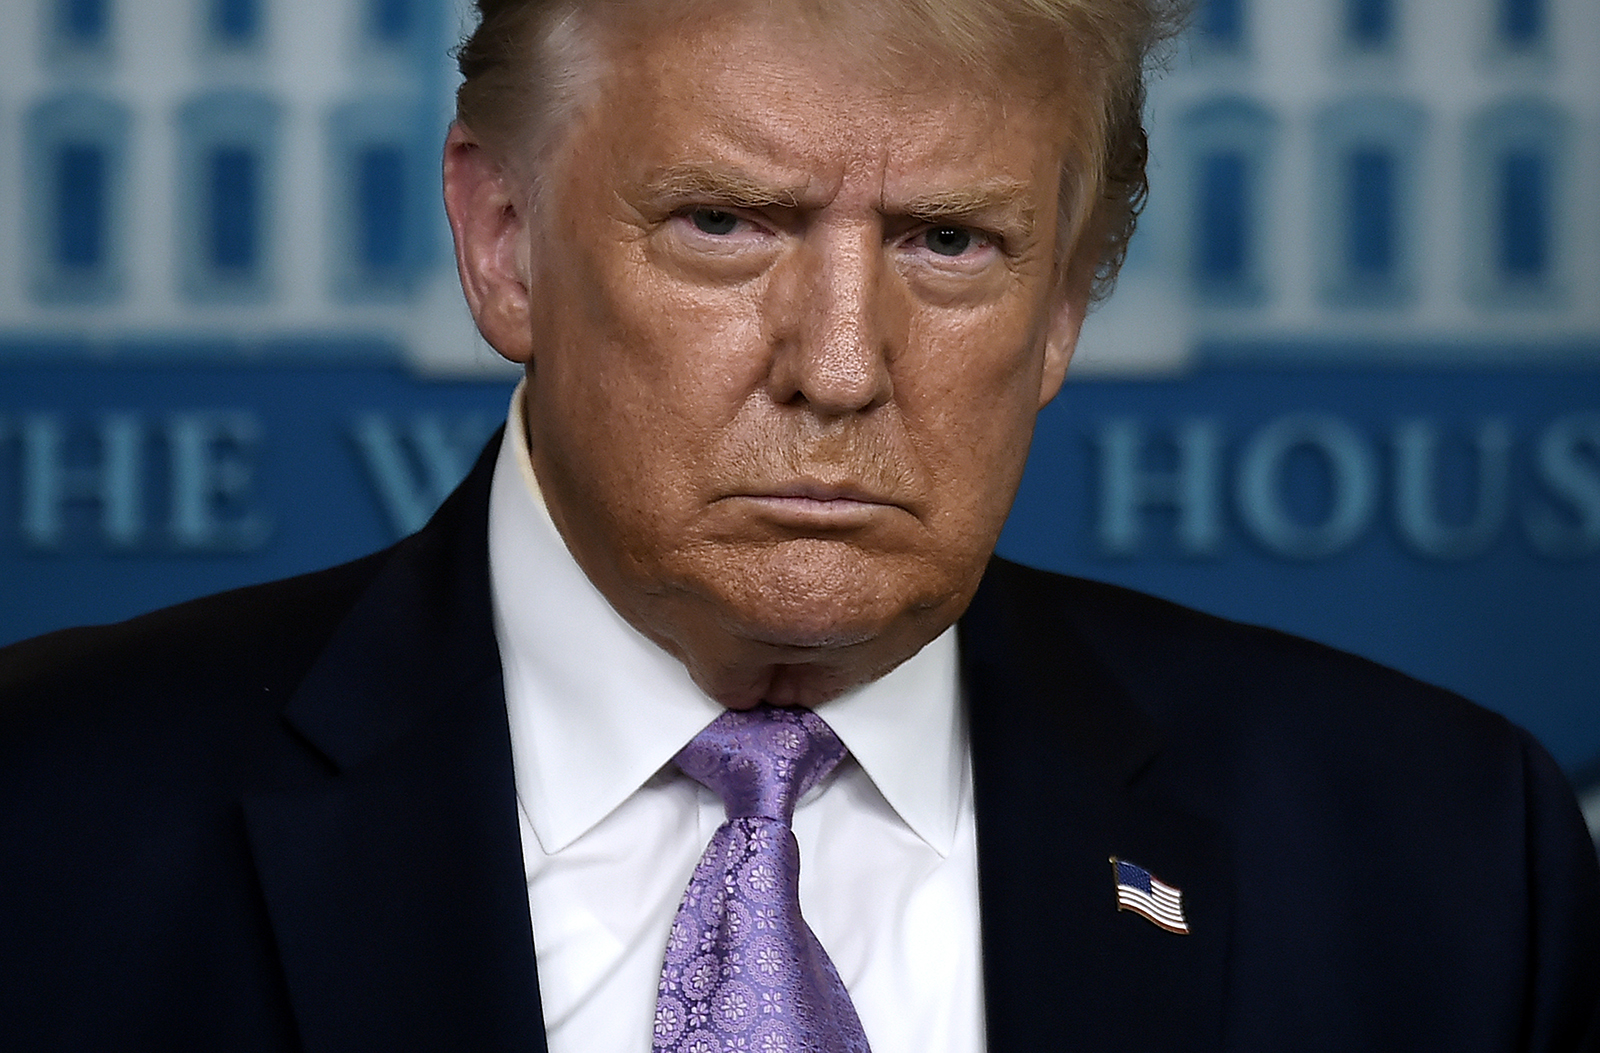 US President Donald Trump answers questions during a news conference at the White House in Washington, DC, on Wednesday, August 5.